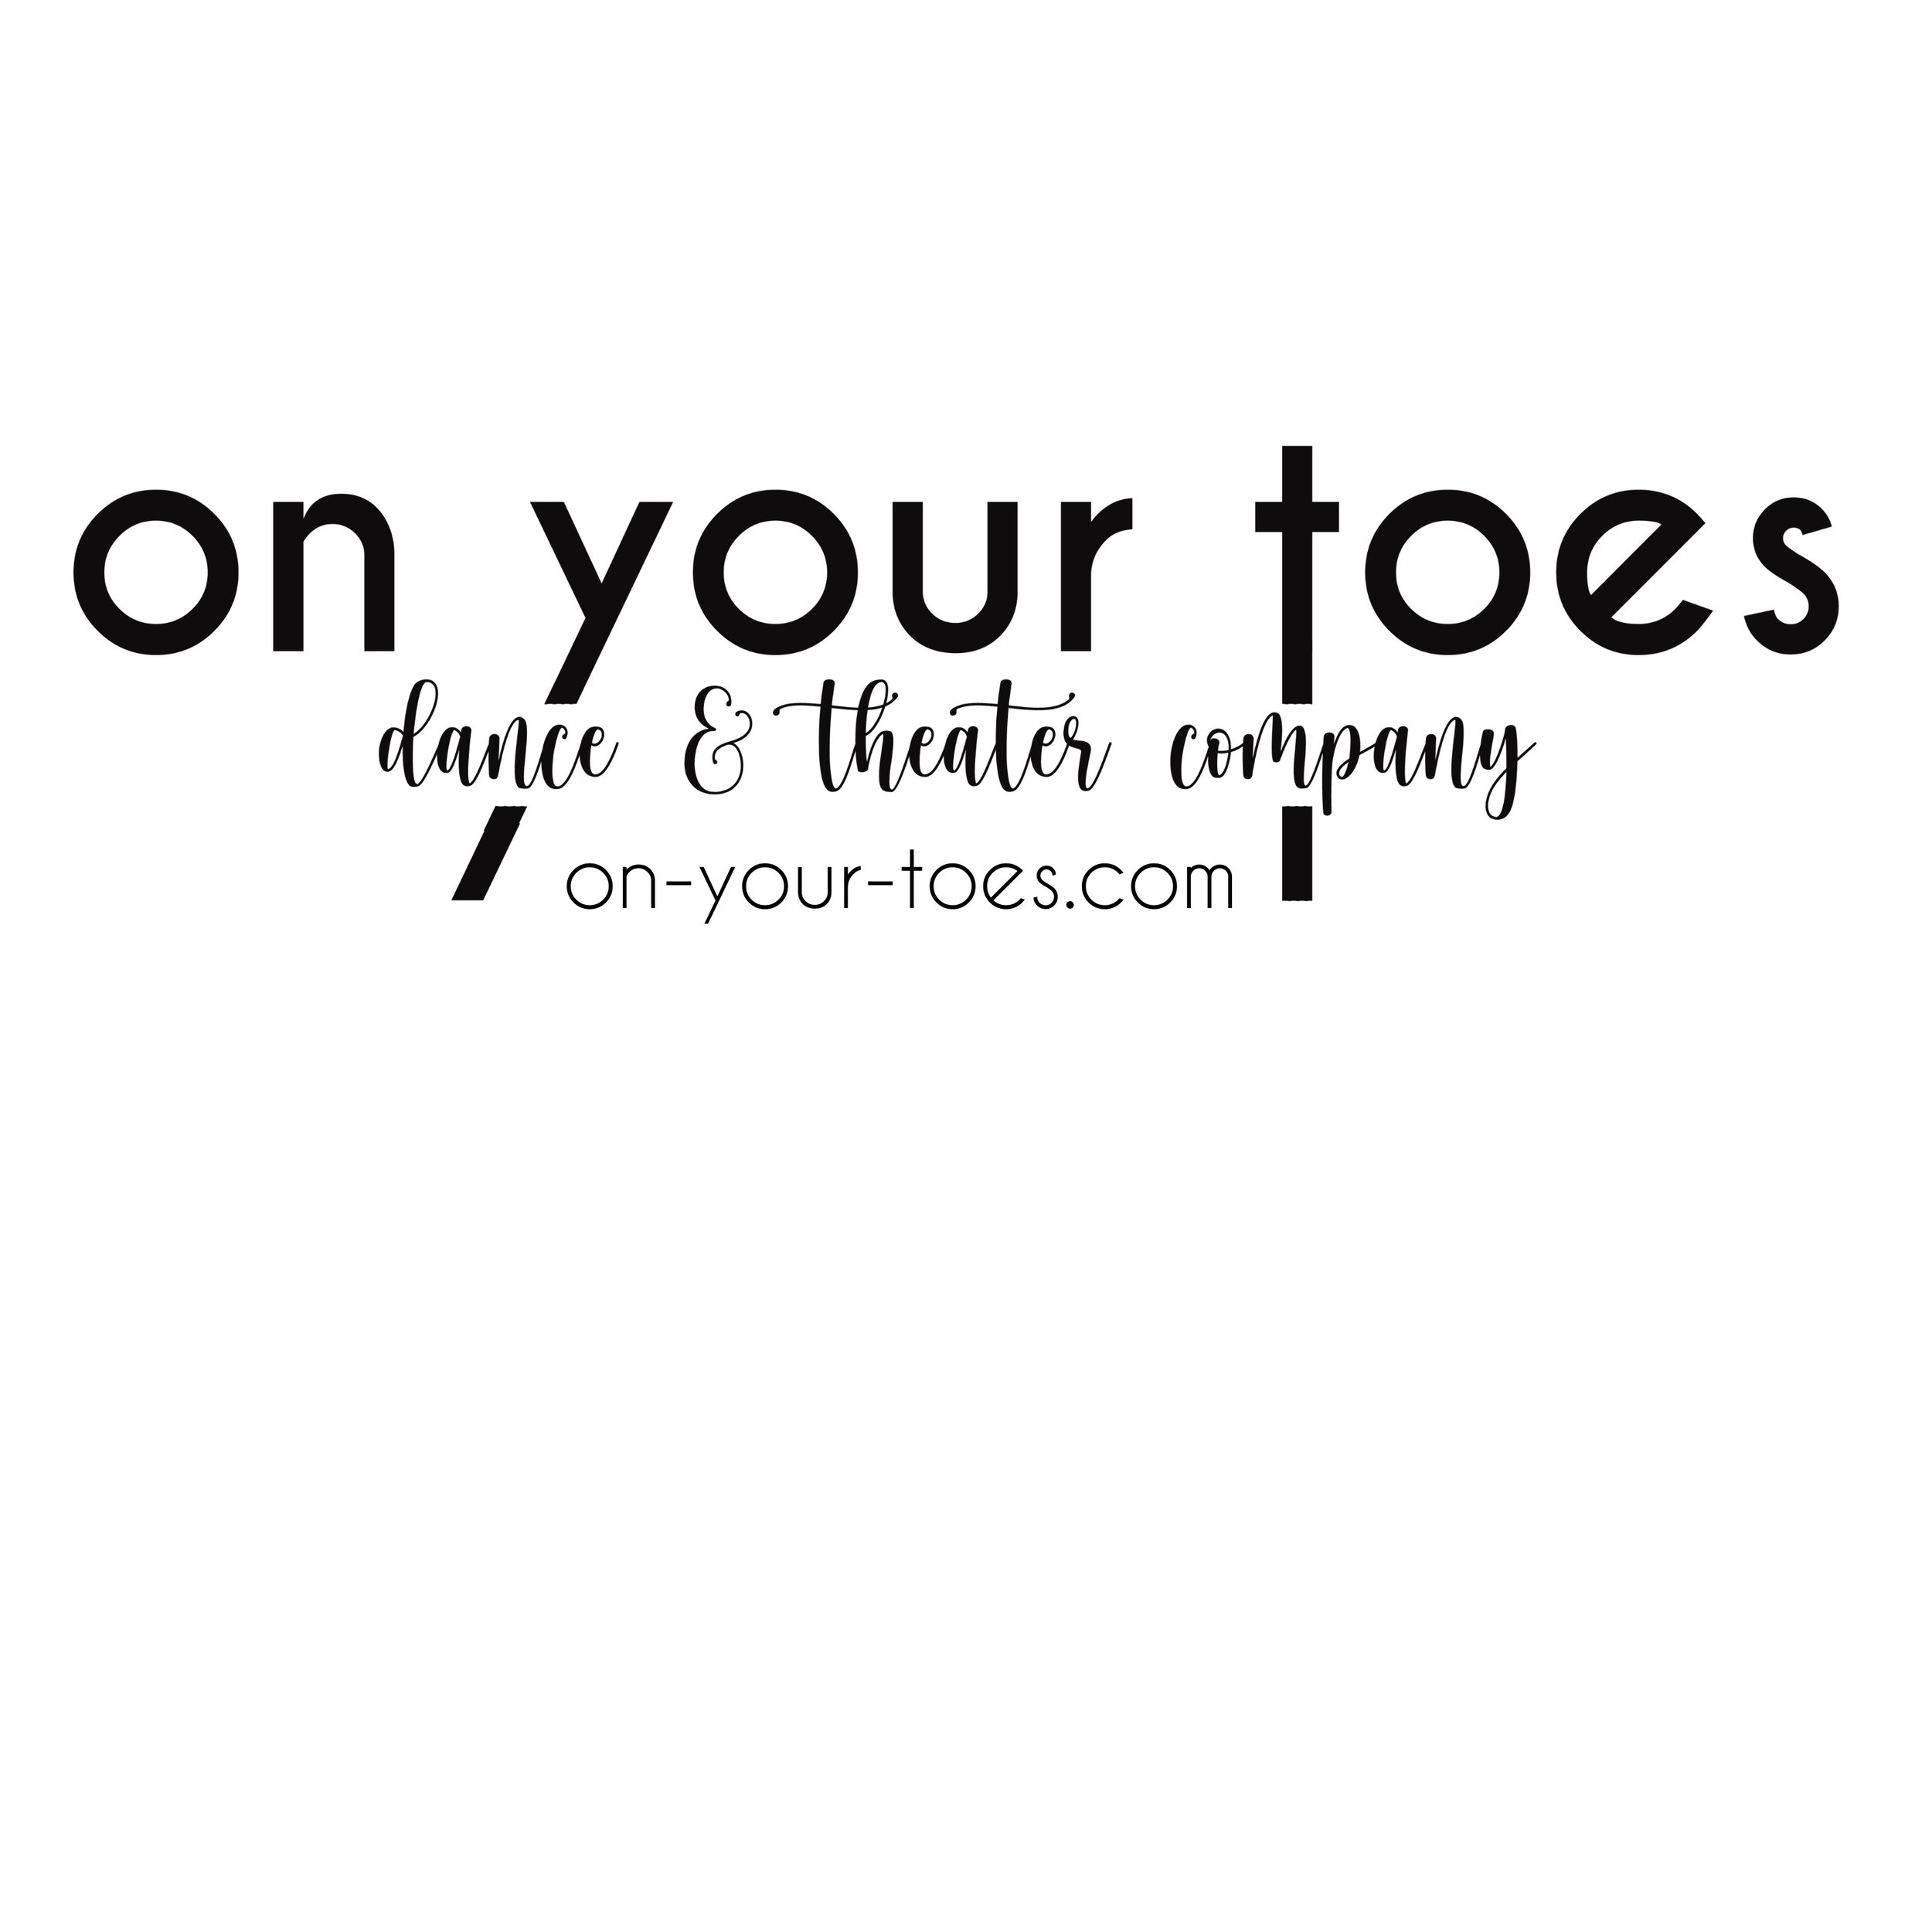 on your toes logo 2.jpg